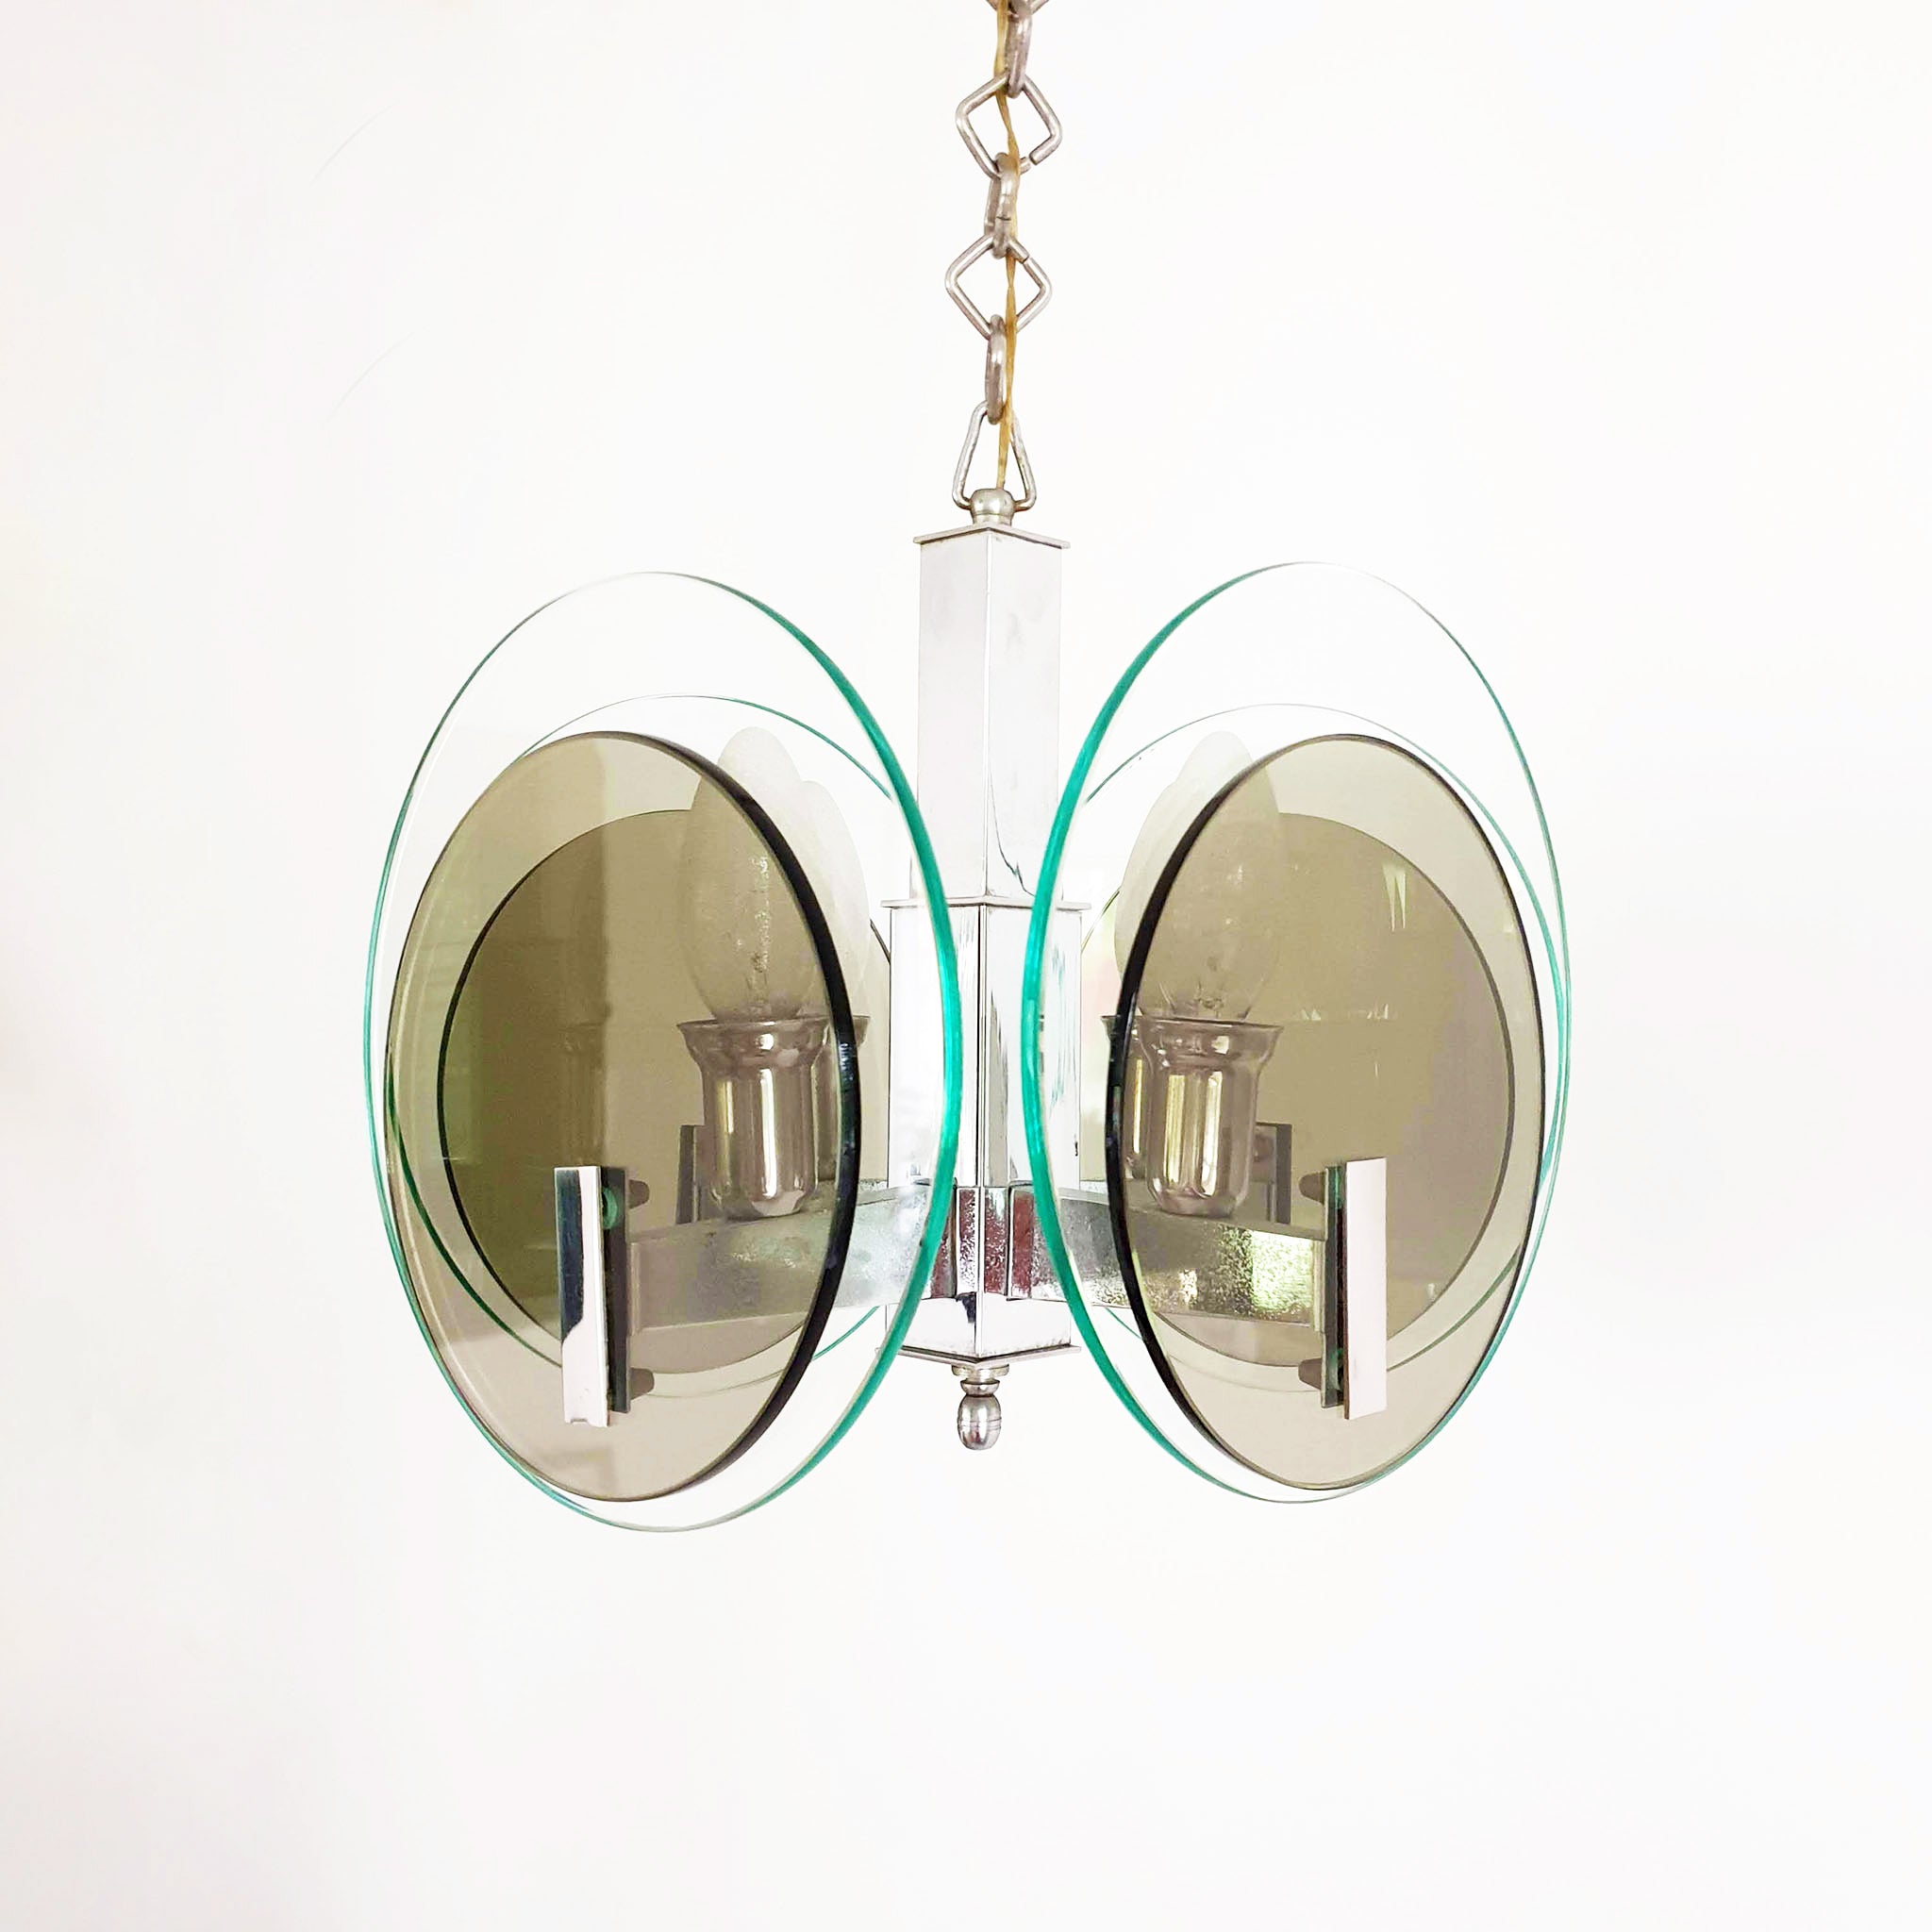 1970s Italian glass and chrome ceiling light by Lupi Cristal Luxor